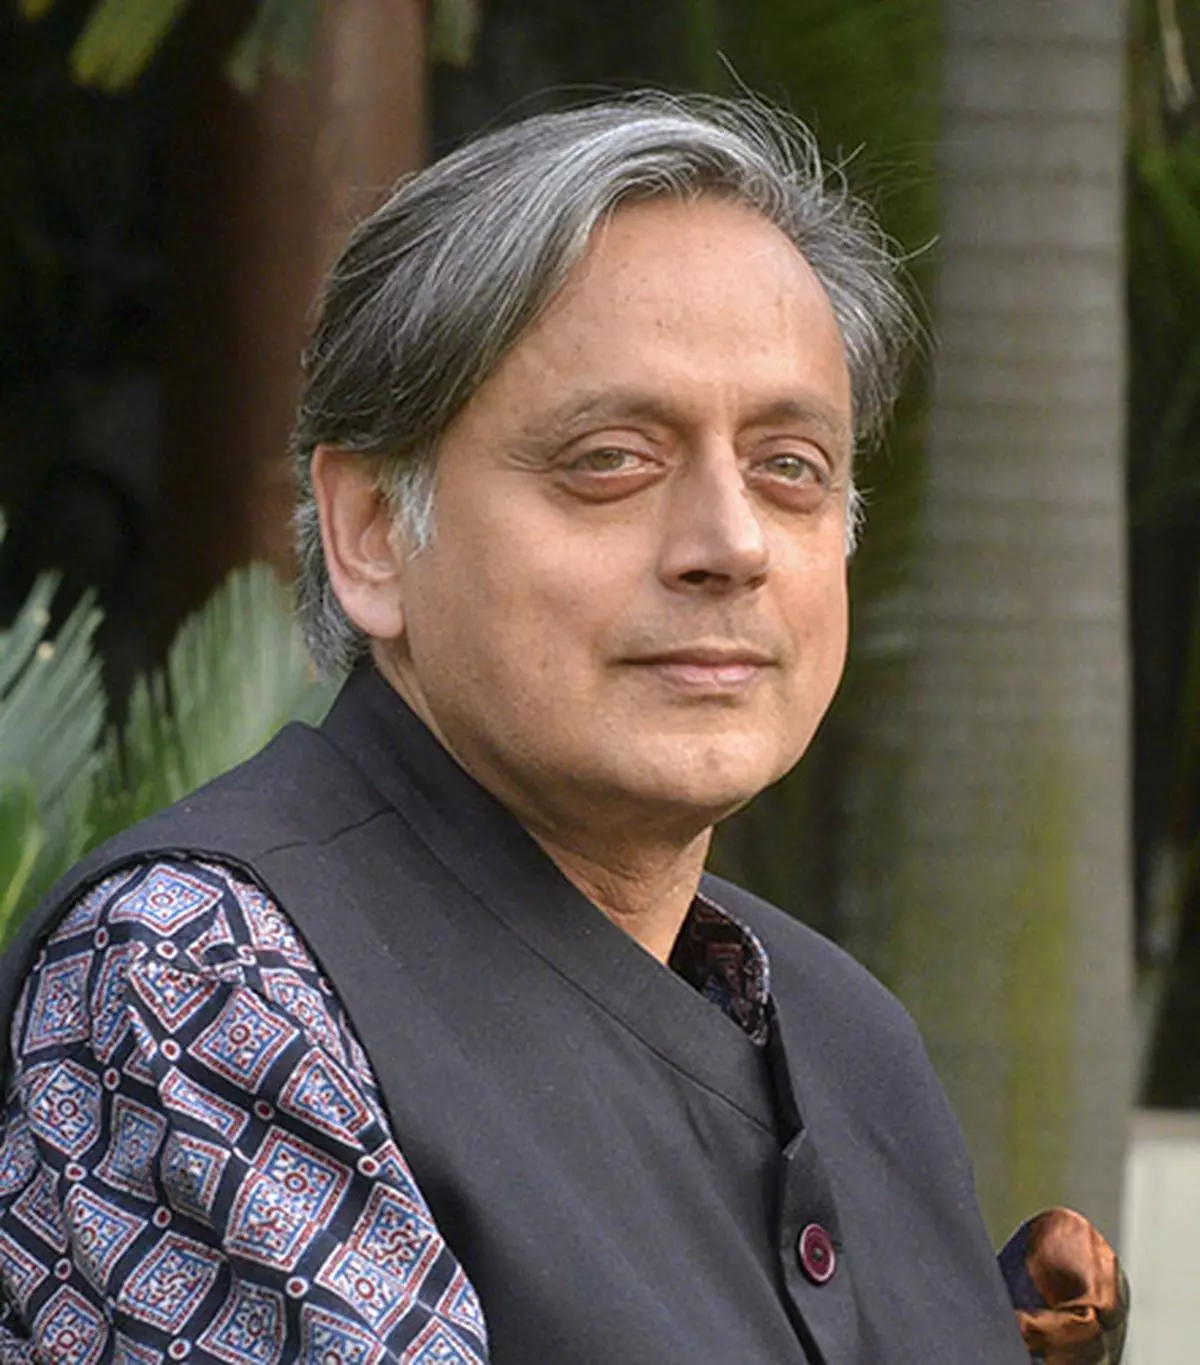 shashi tharoor: Taken aback by 'attack' on Mahua Moitra; urge people to  'lighten up': Tharoor - The Economic Times